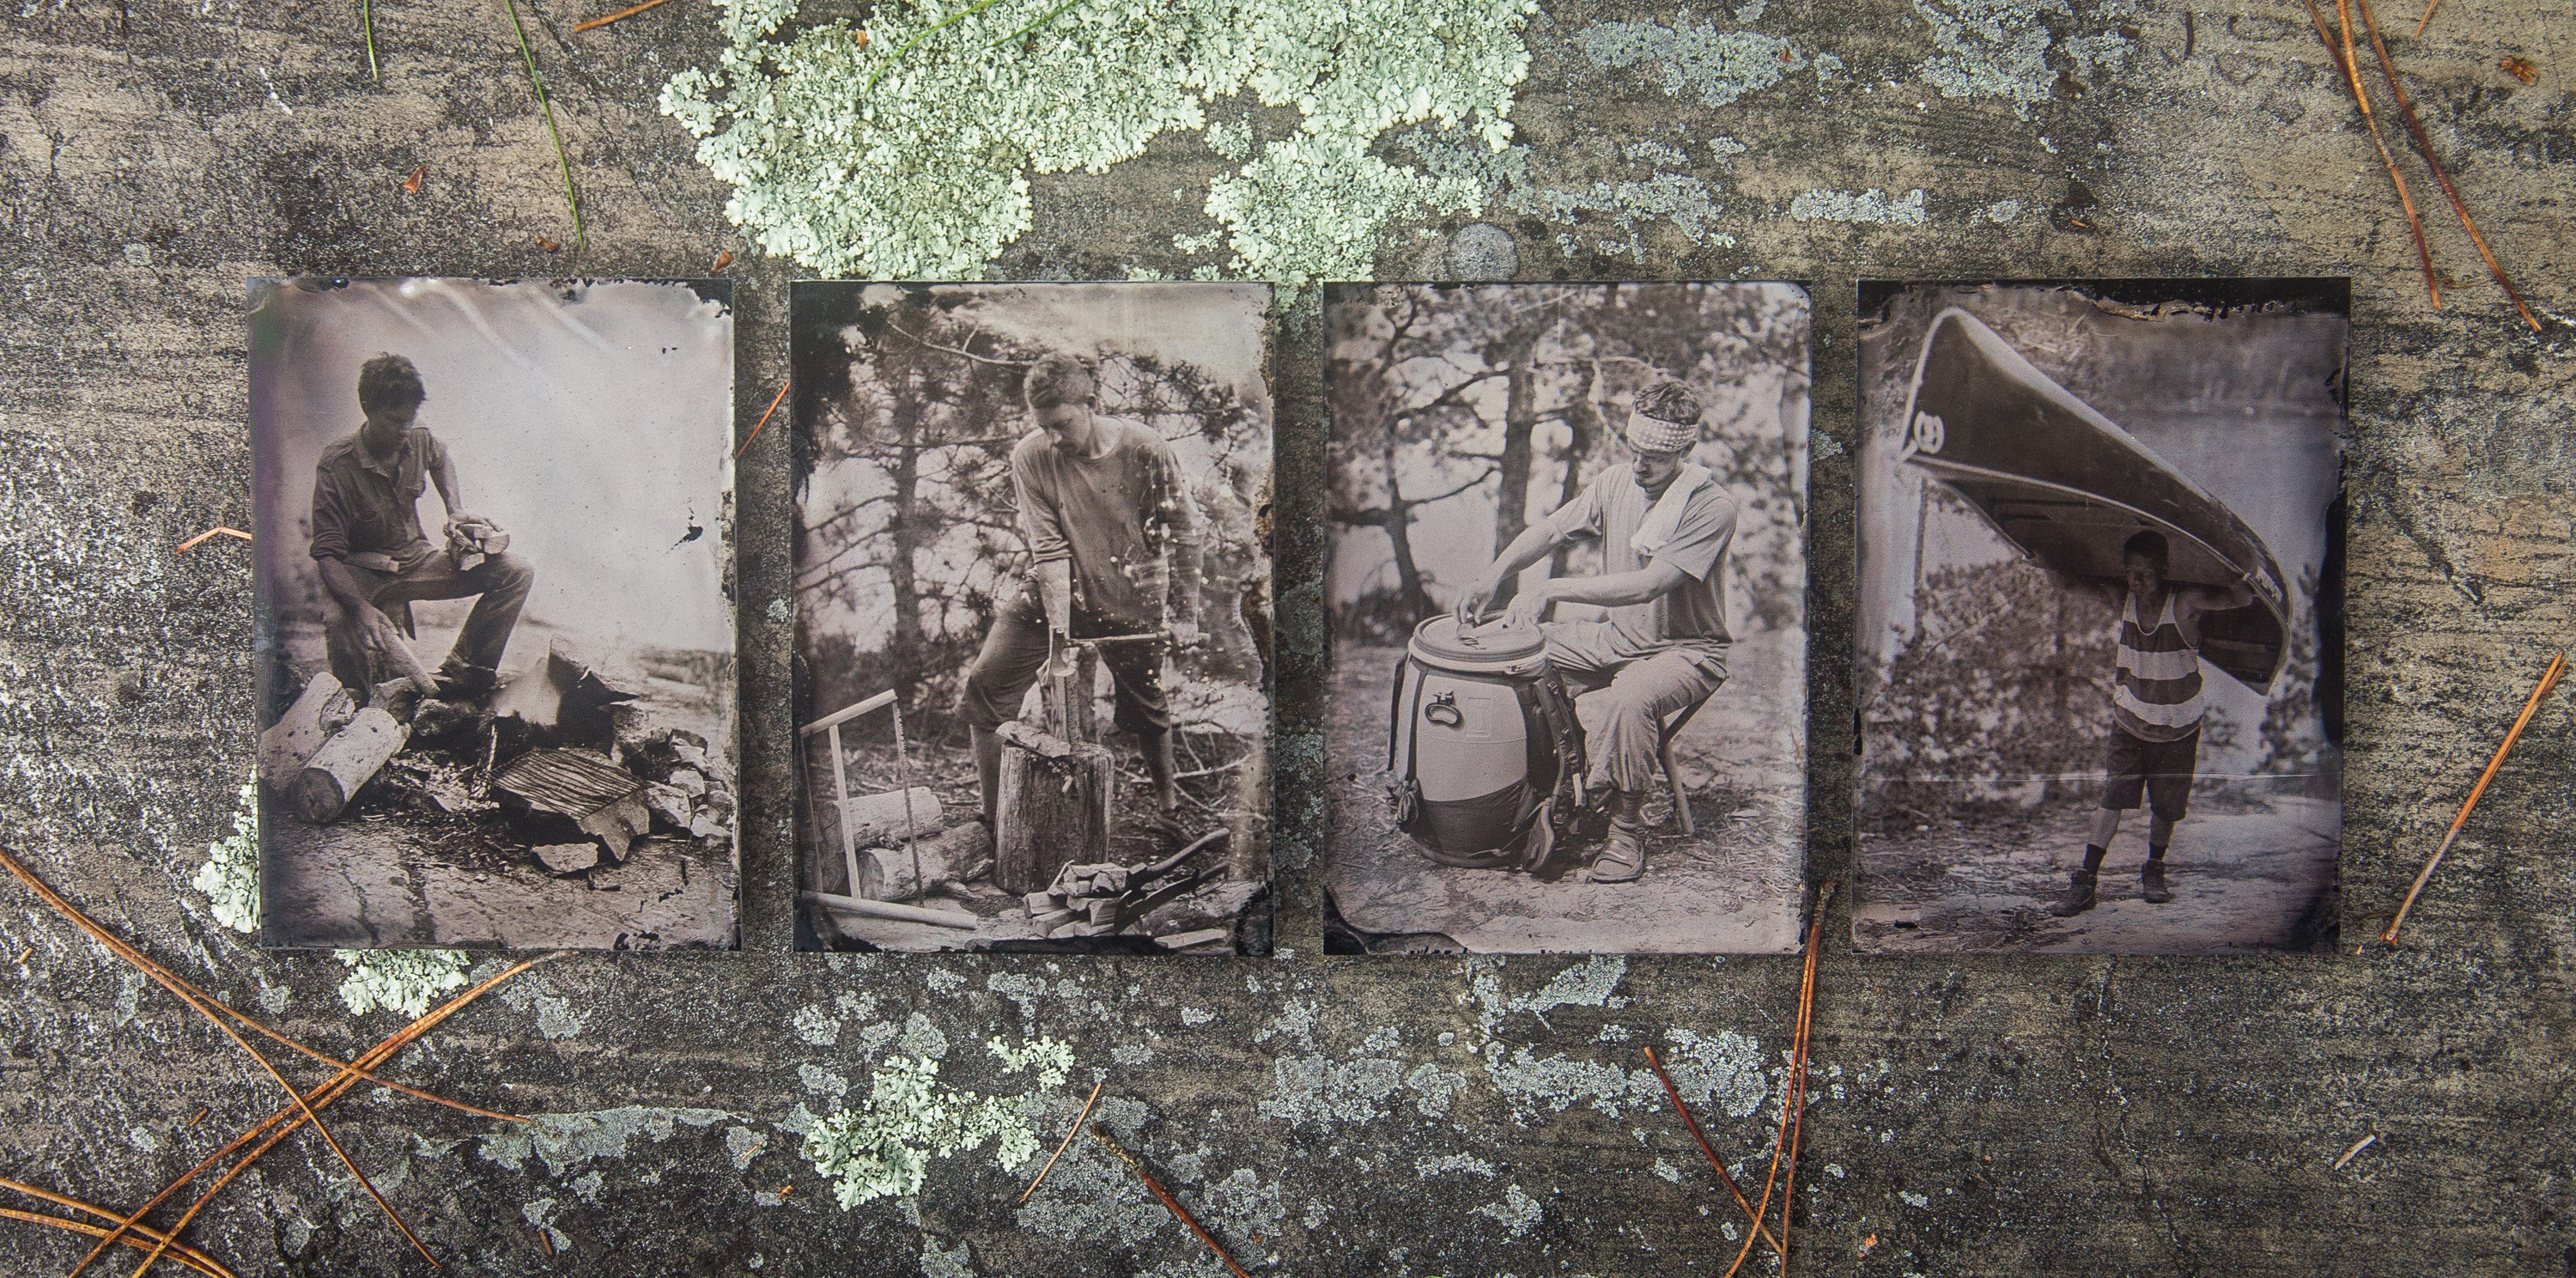 The Tintype Studio: Revisiting a Chapter of Photography History